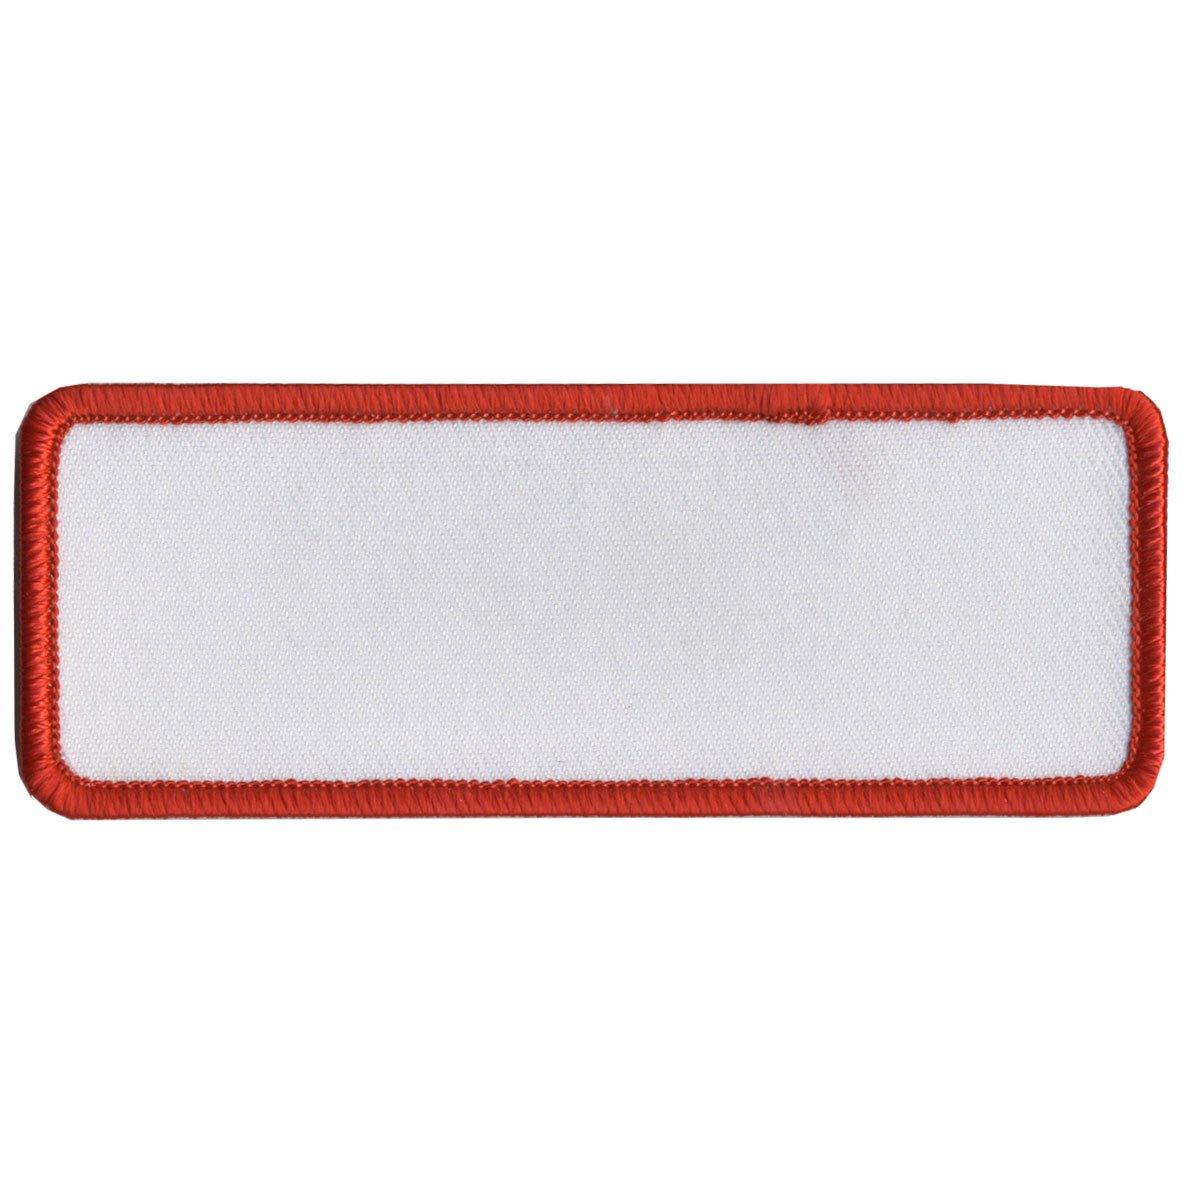 Hot Leathers Blank White W/ Red Trim 4" X 1.5" Patch - American Legend Rider